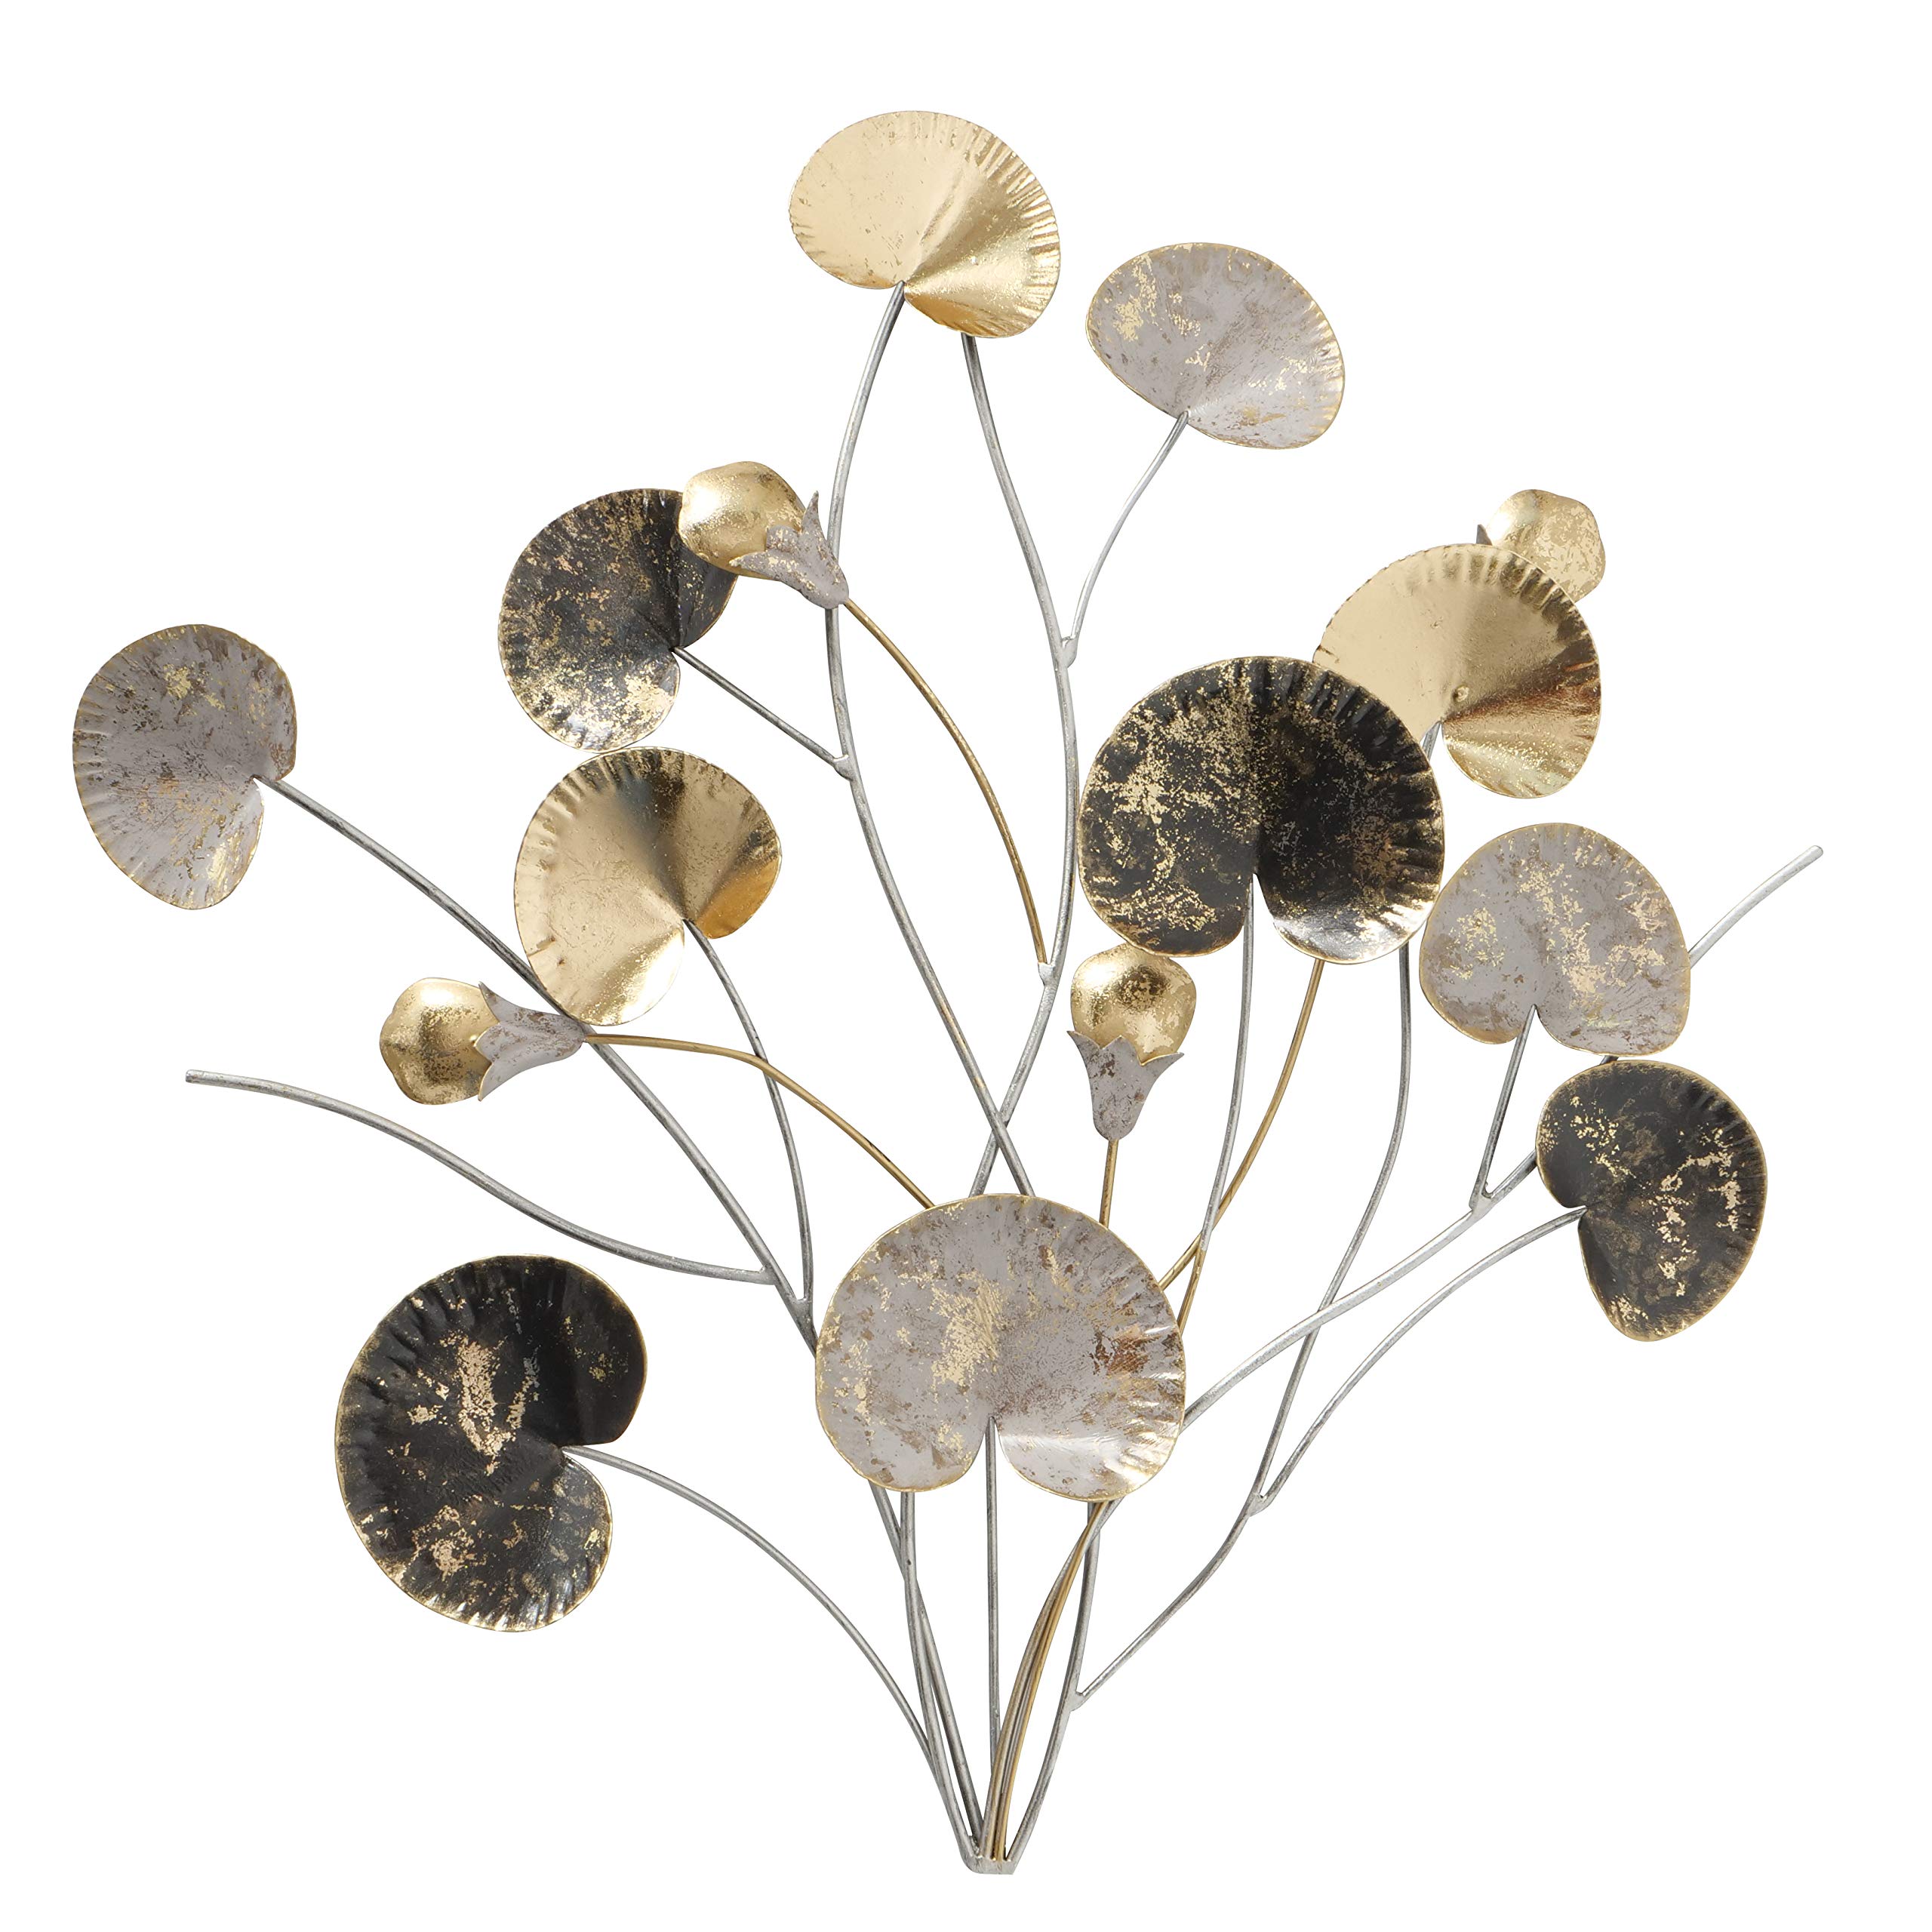 WHW Whole House Worlds Abstract Botanical Metal Wall Art, Bouquet of Blossoms, Stems and Leaves, Gold Gilt, Silver, Black and Grey Details, Rub-Thr...